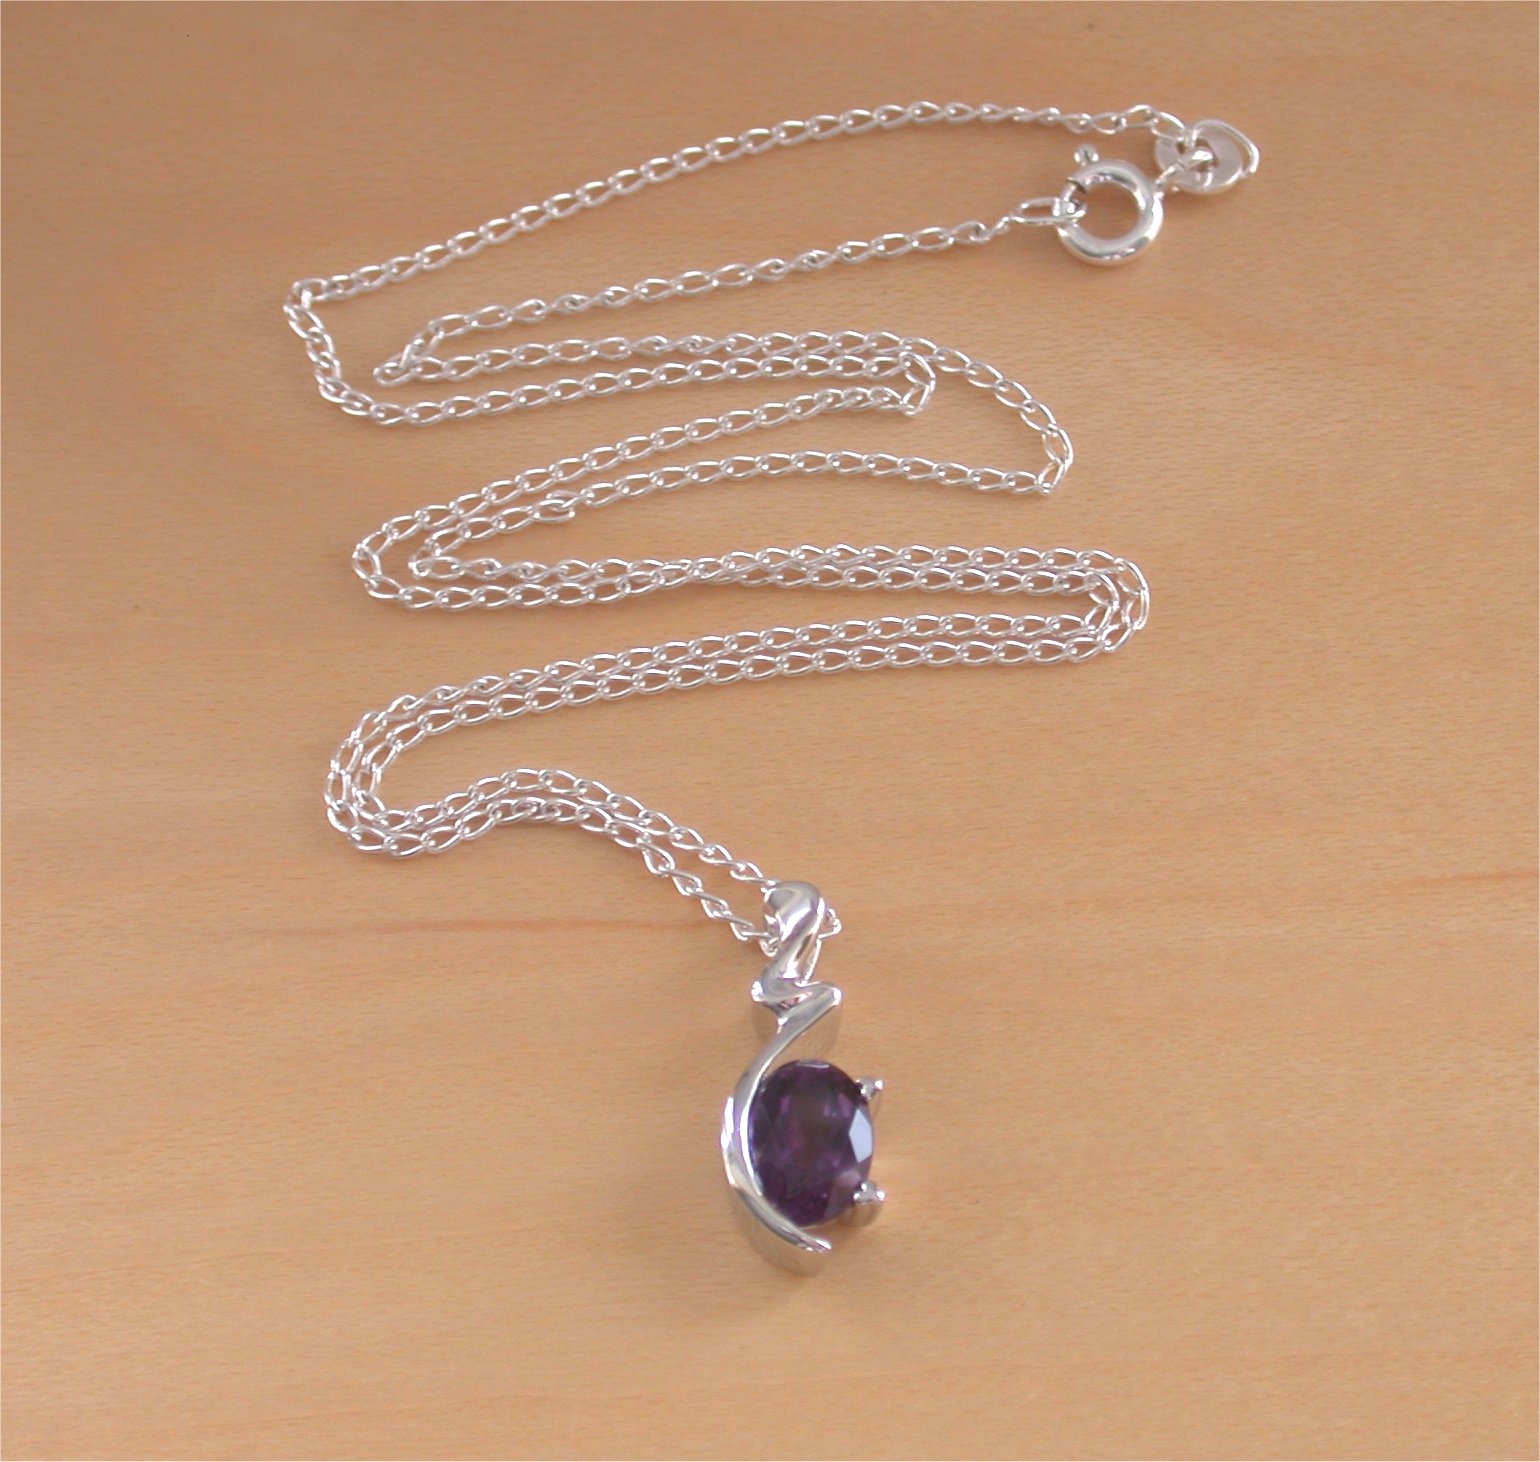 STERLING SILVER AMETHYST OVAL LOCKET PENDANT WITH 18" CHAIN MADE IN UK